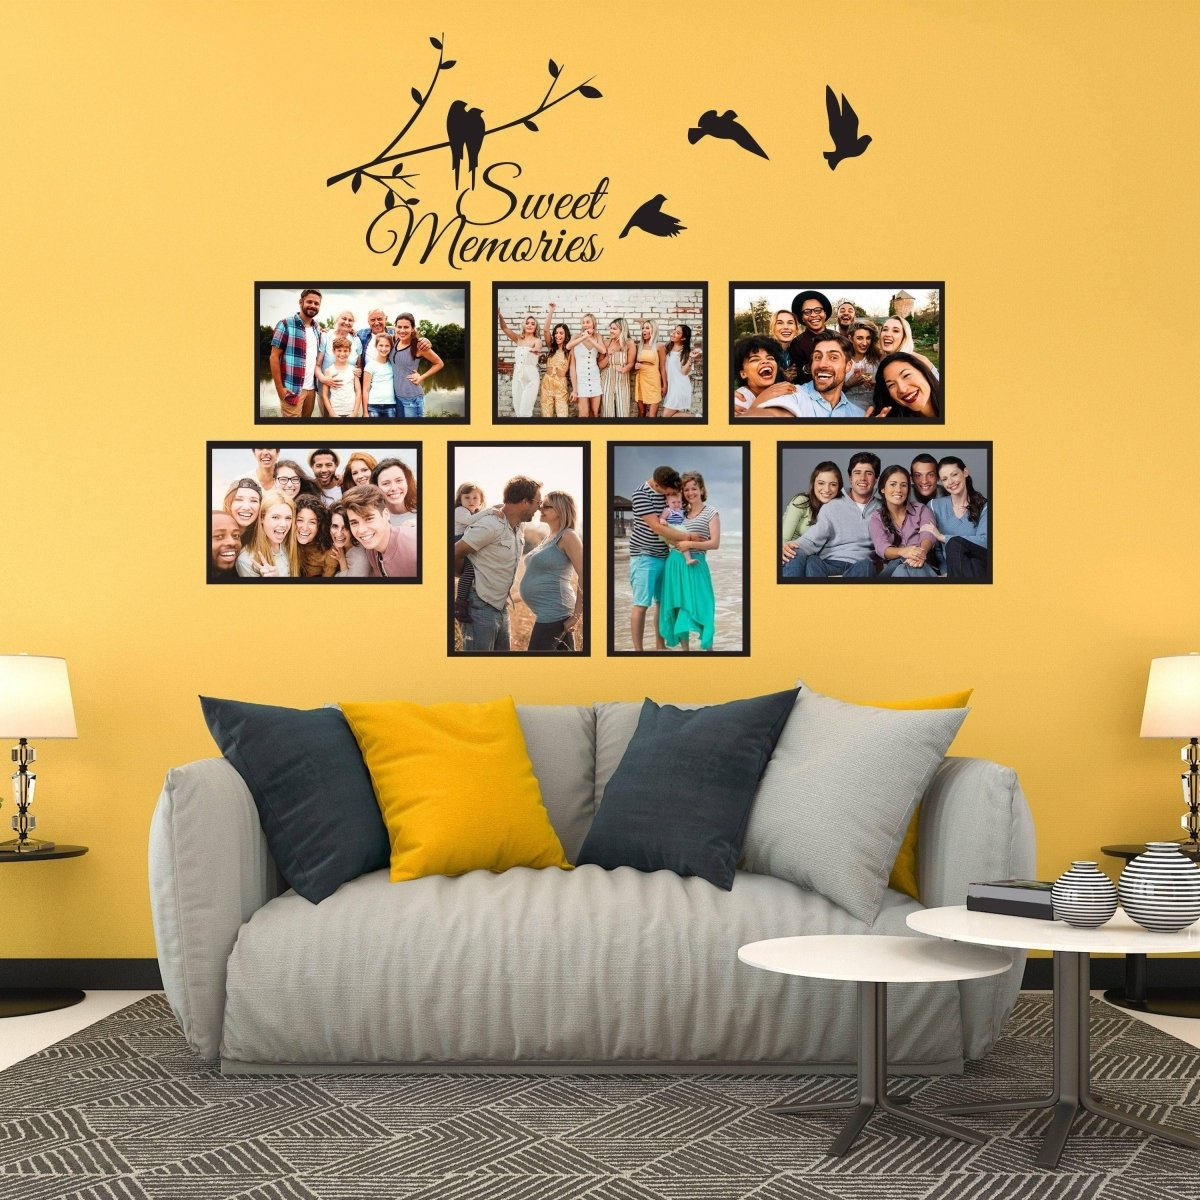 Vinyl Wall Decal - Stylish and Sophisticated Frames Design